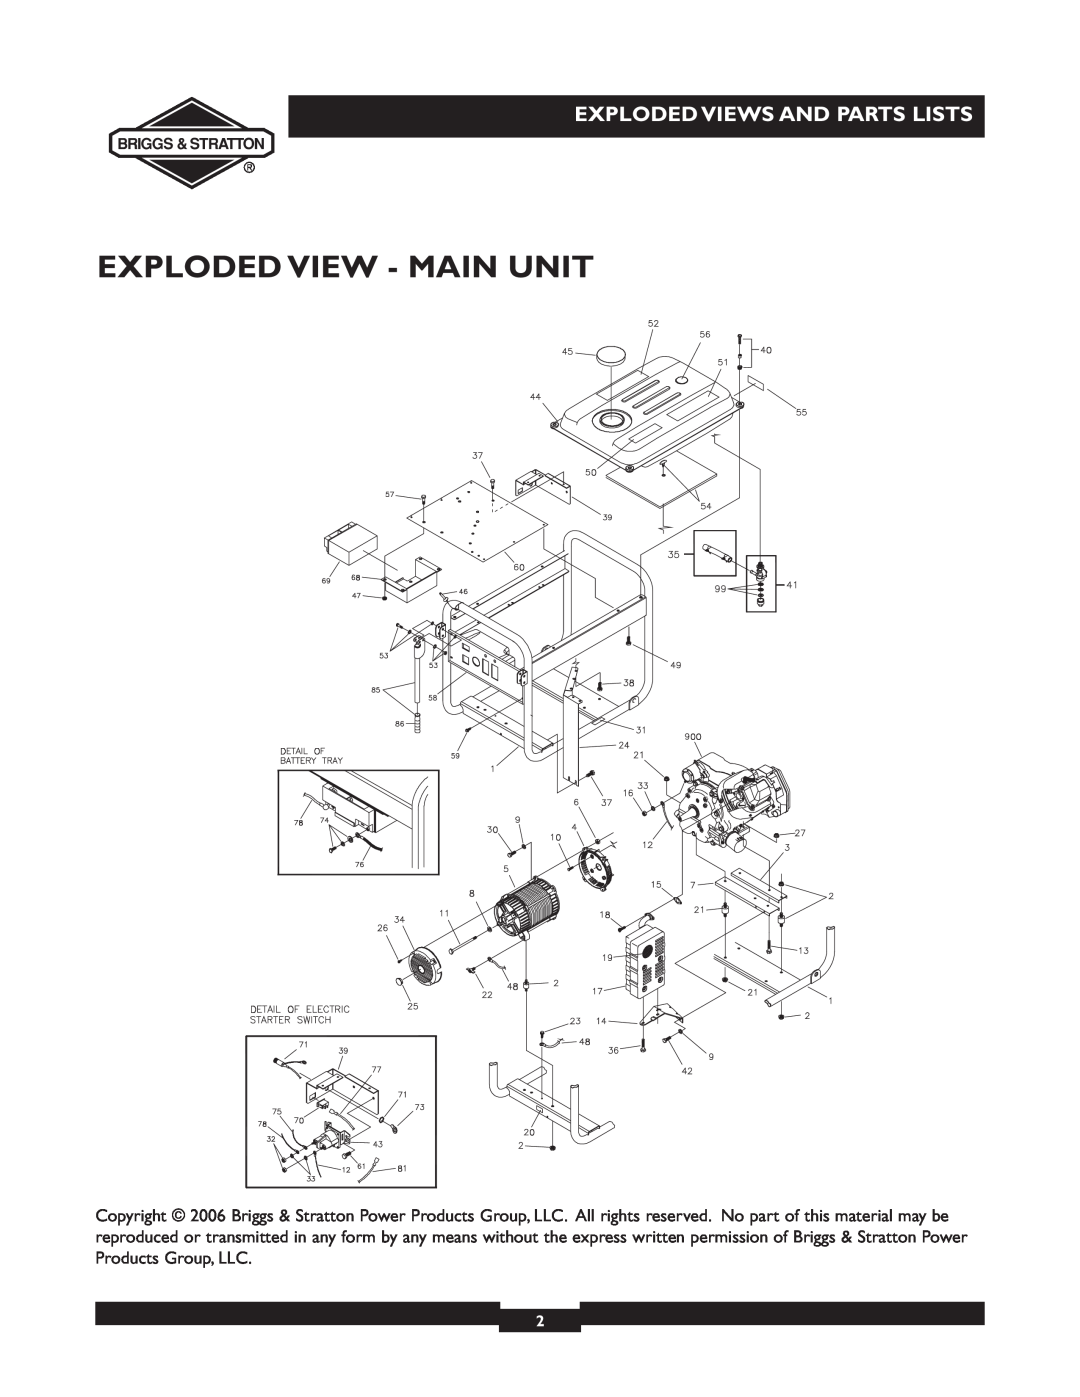 Briggs & Stratton 30244 manual Exploded View - Main Unit, Exploded Views And Parts Lists 